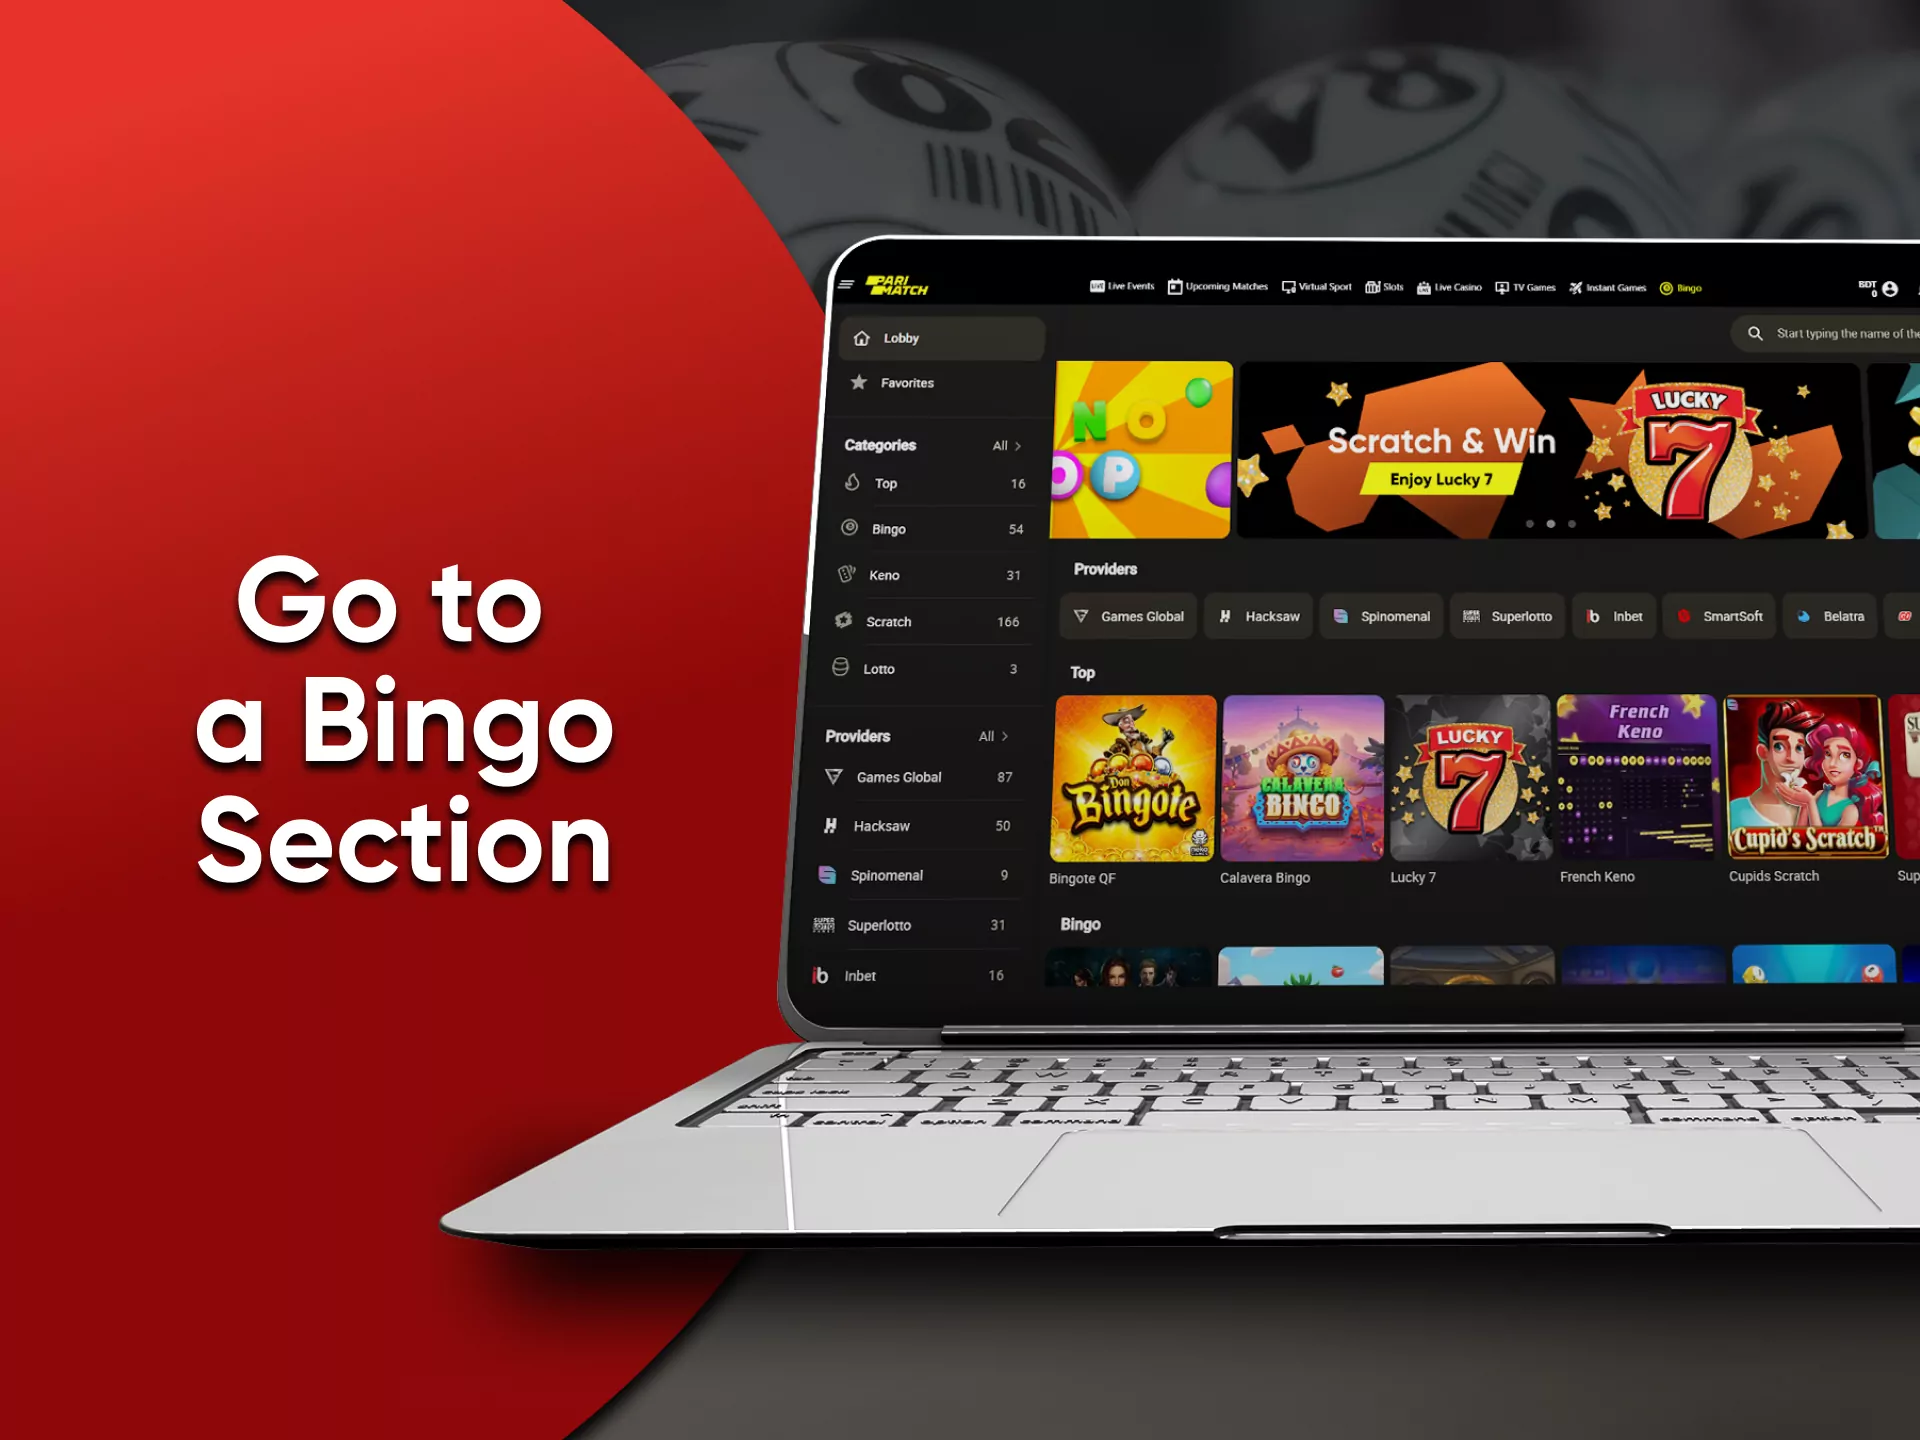 Go to the desired section to play Bingo.